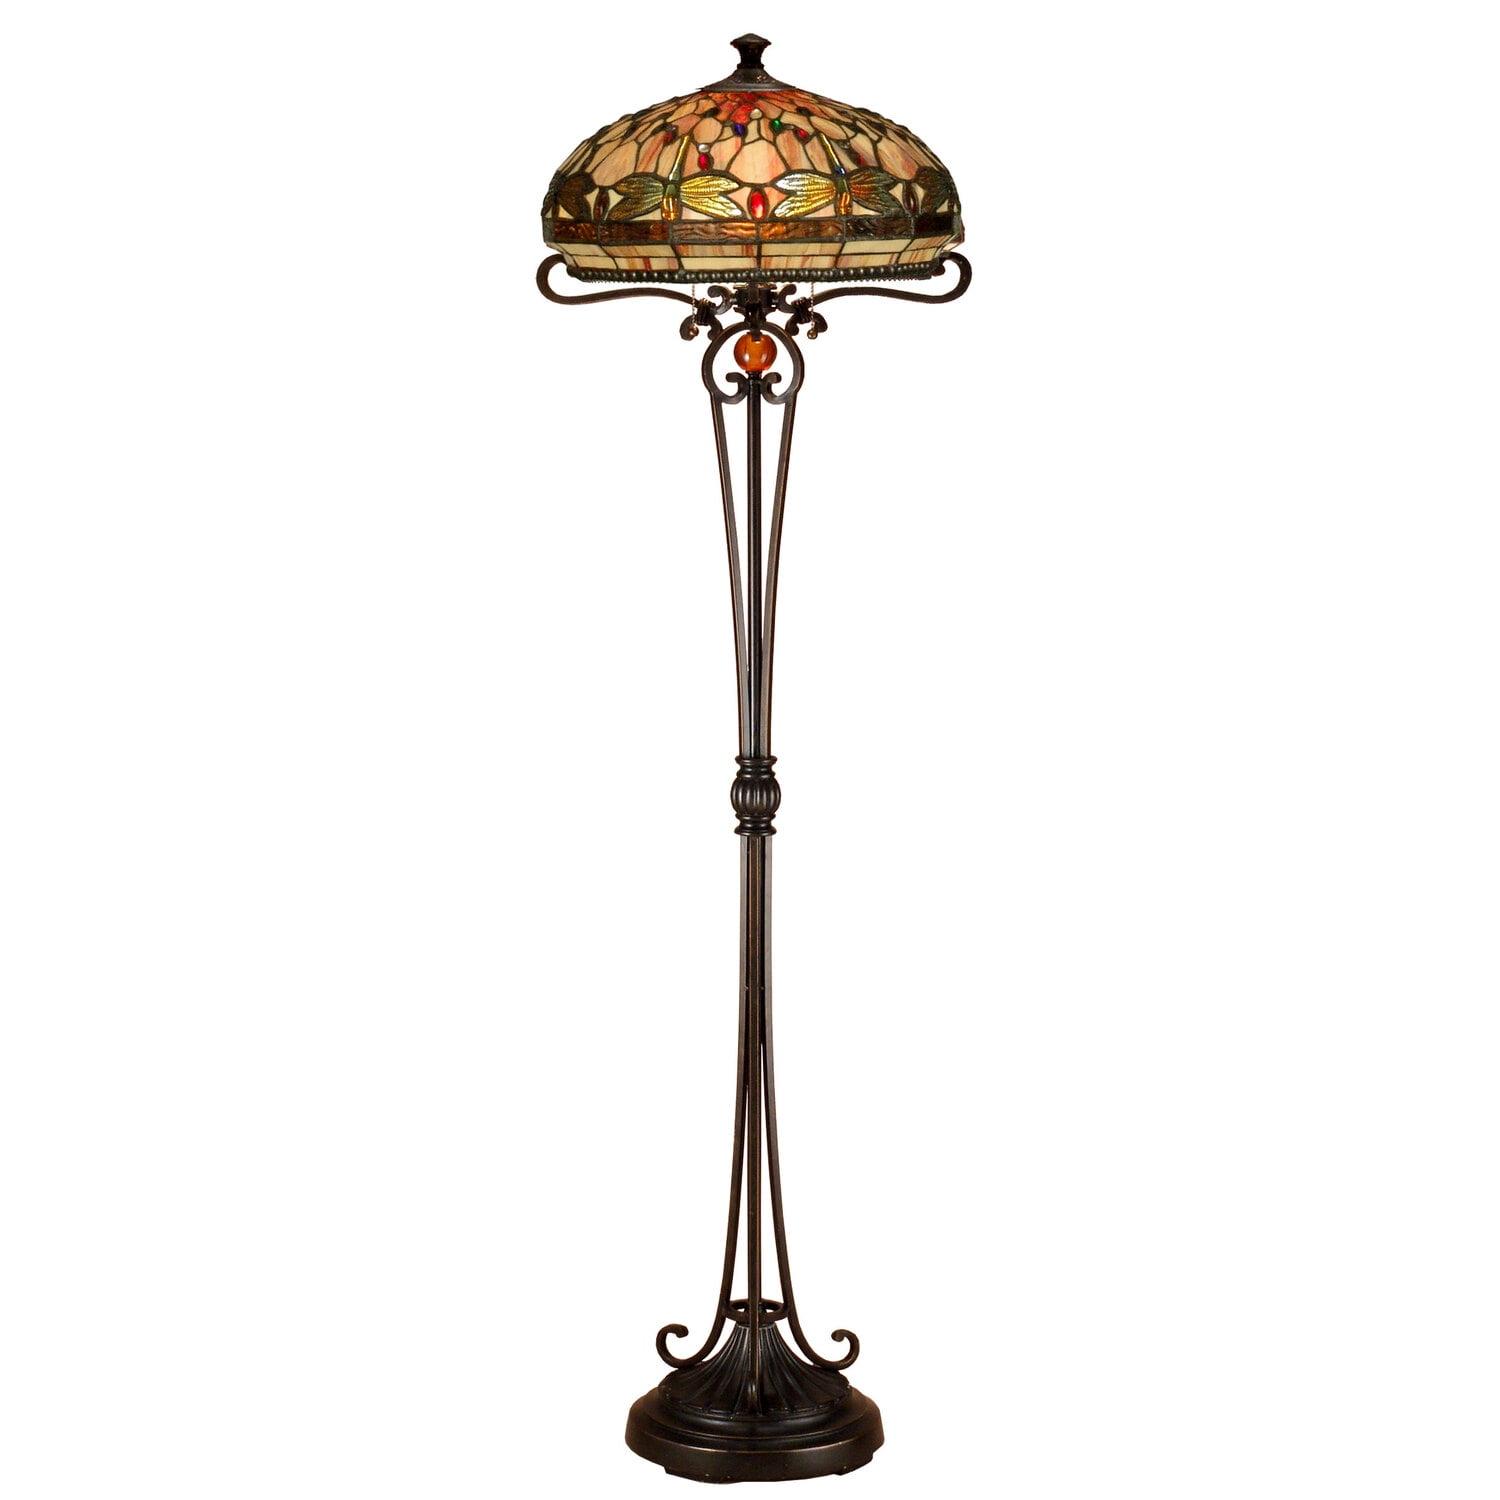 Briar Dragonfly Stained Glass Floor Lamp with Bronze Detailing